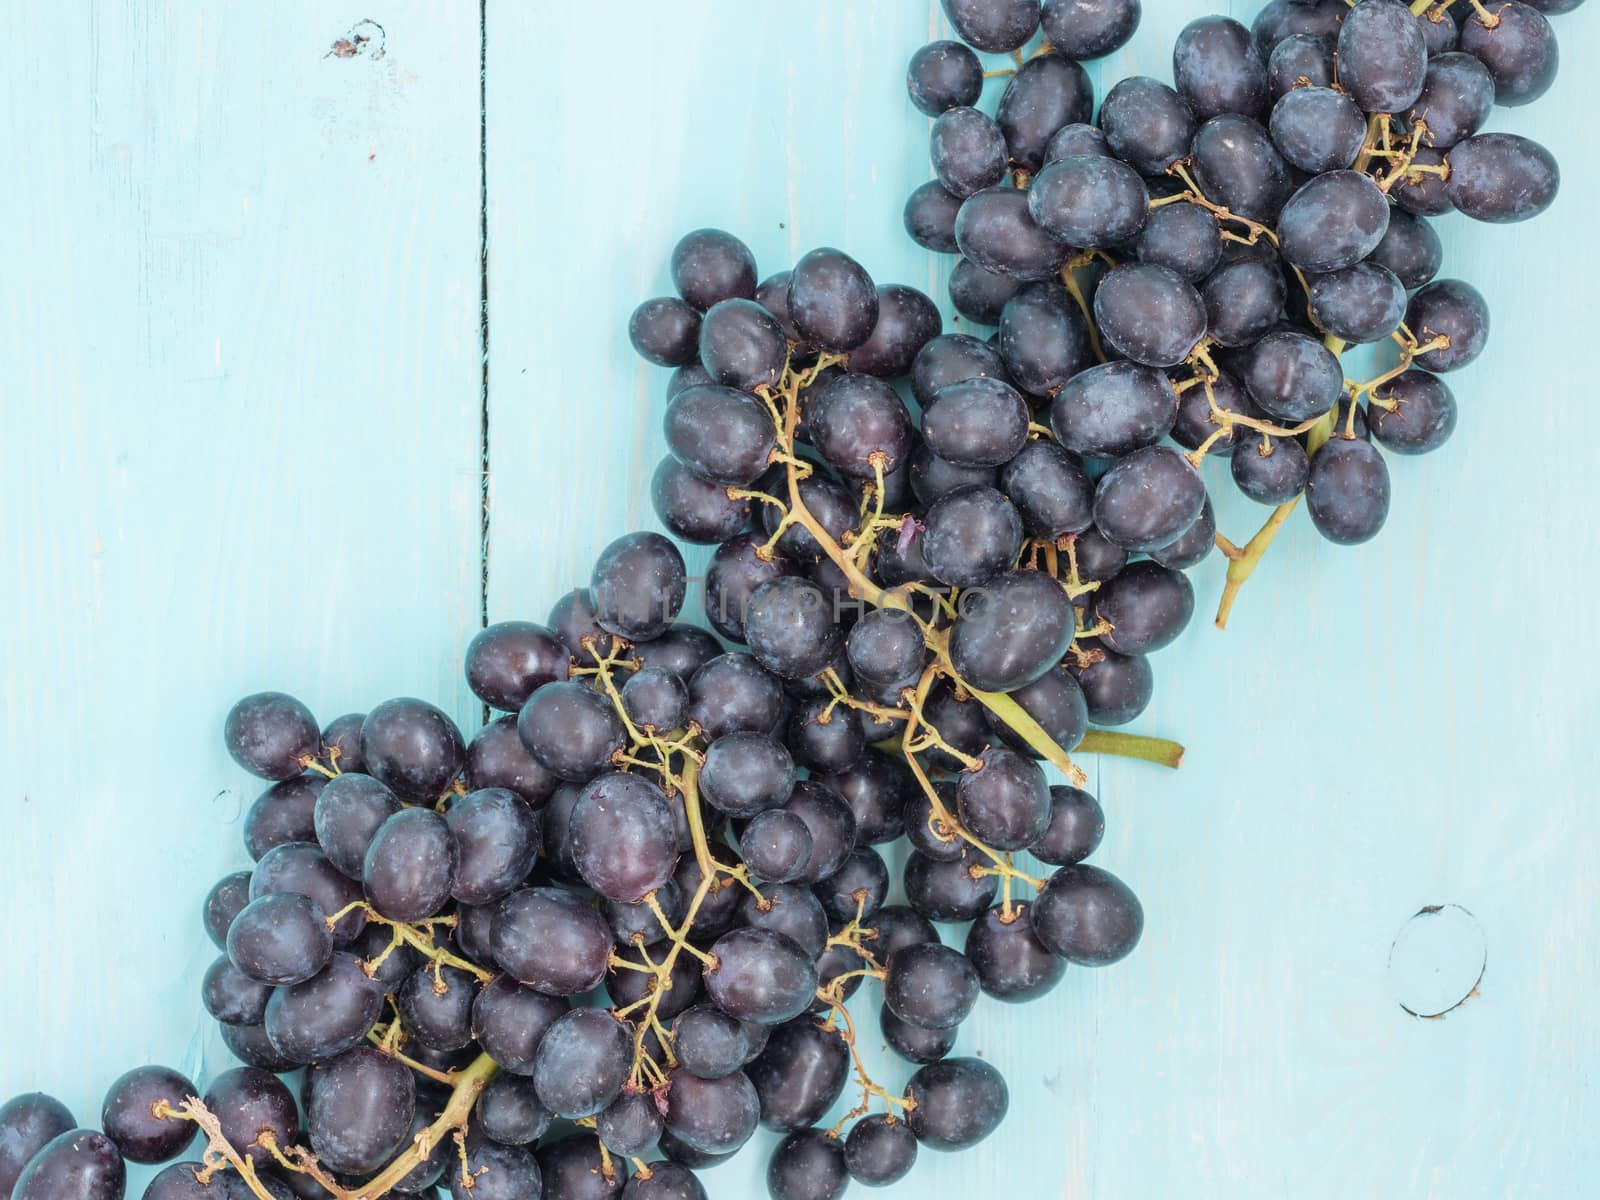 Purple grapes on wooden table by fascinadora